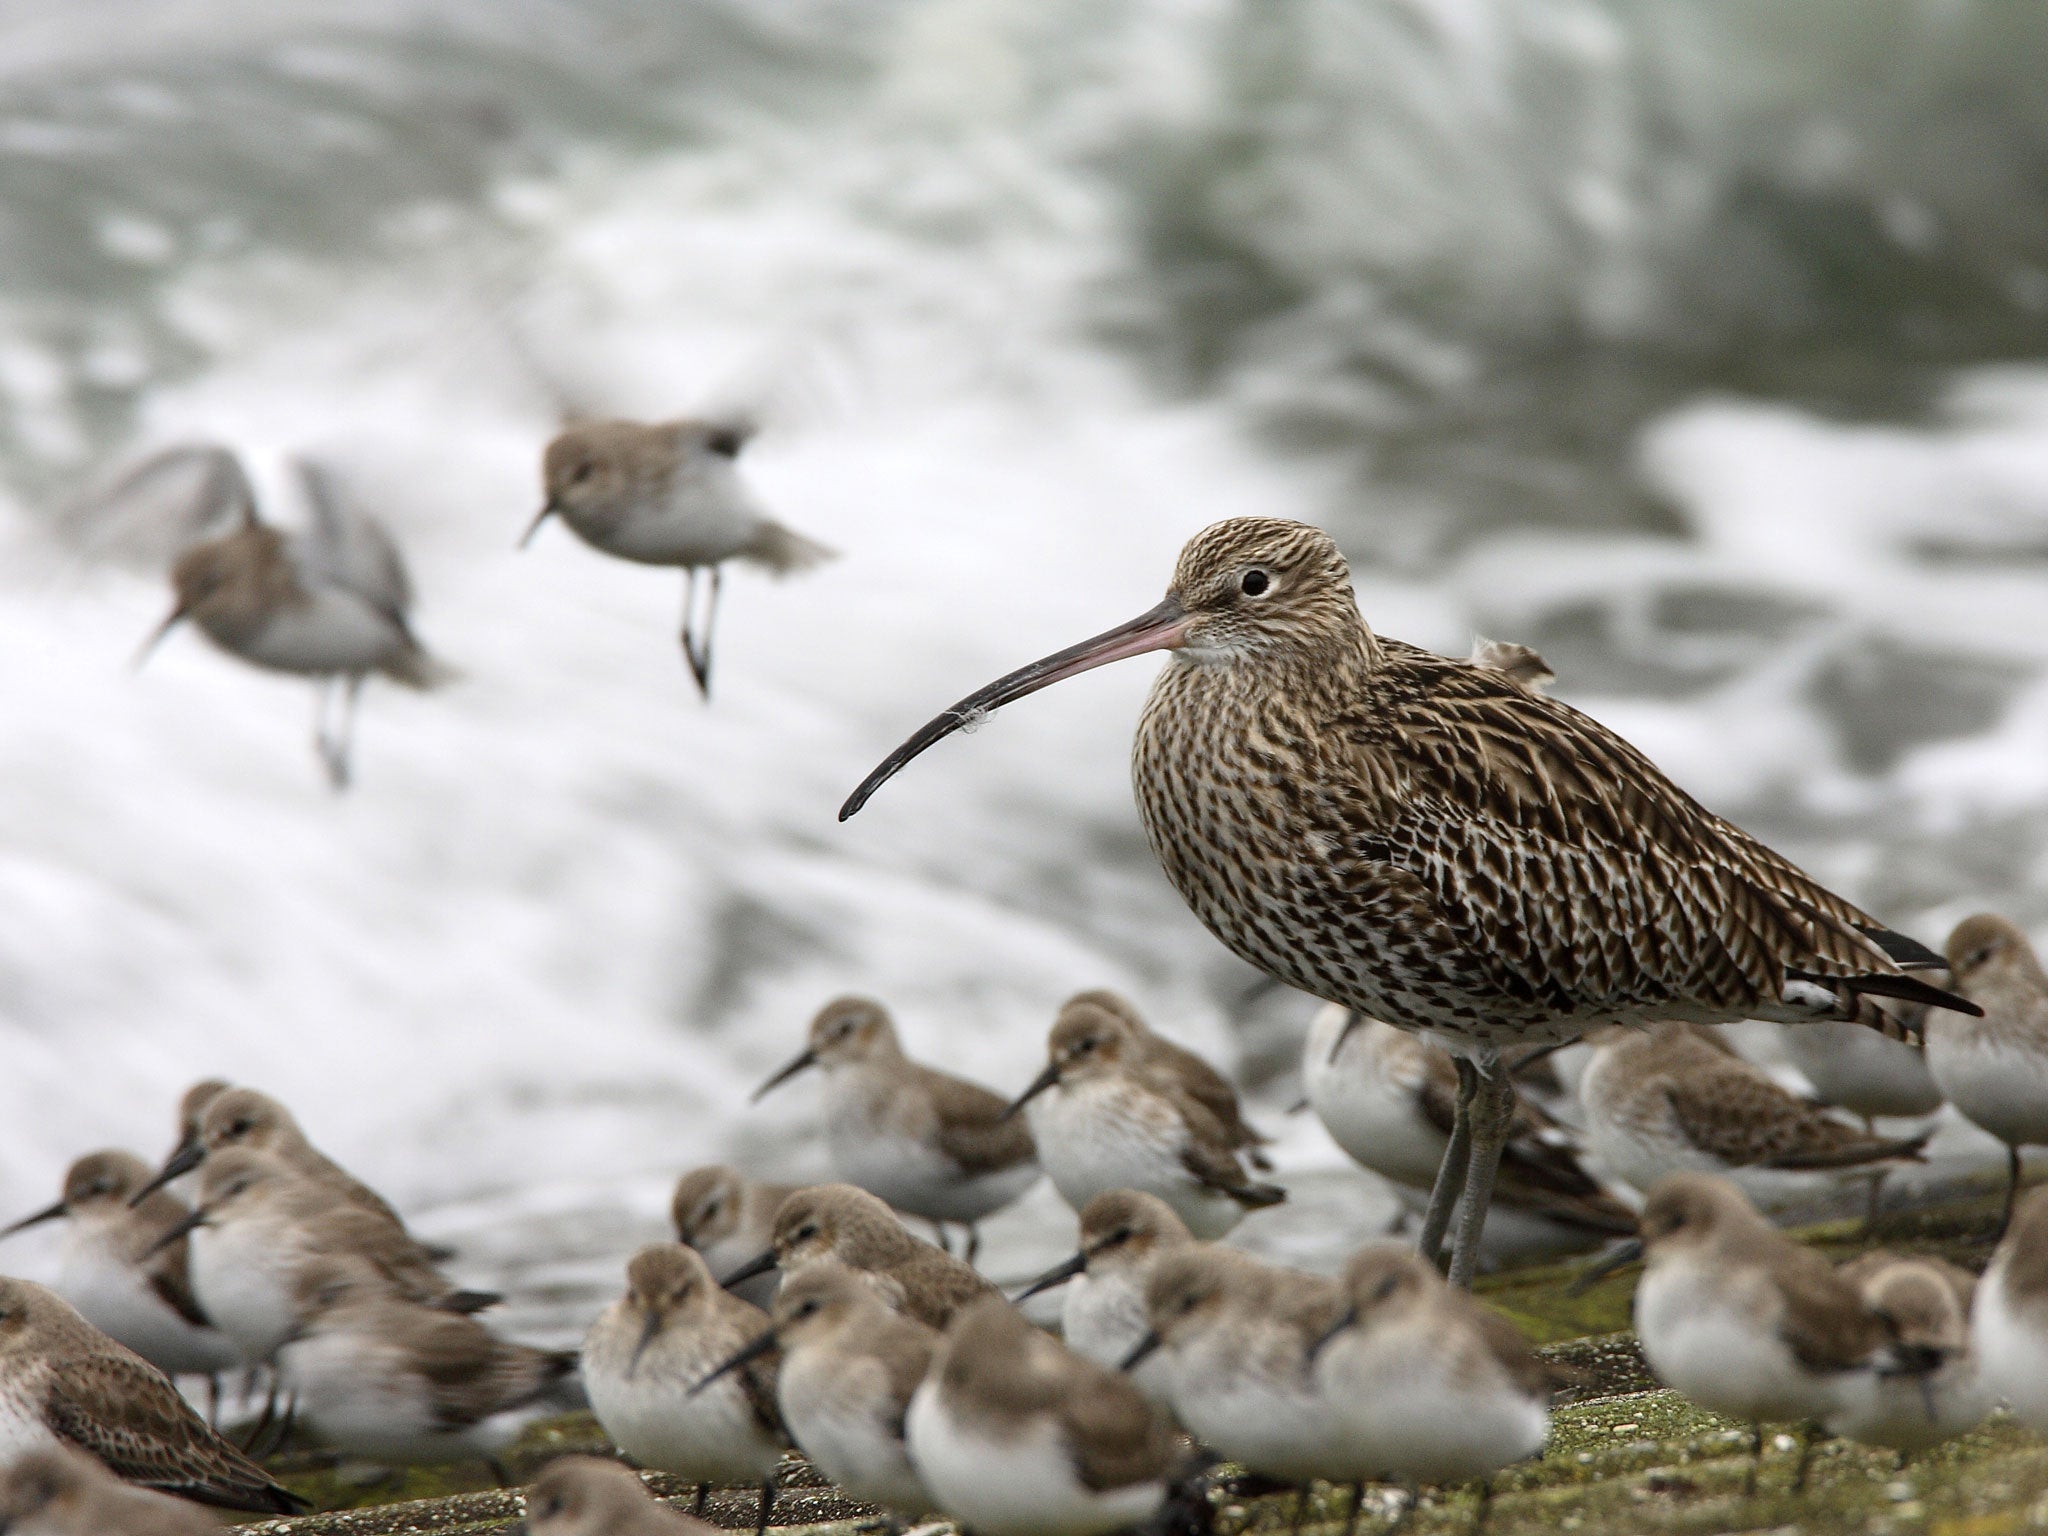 Still here: a curlew between dunlins in the Netherlands